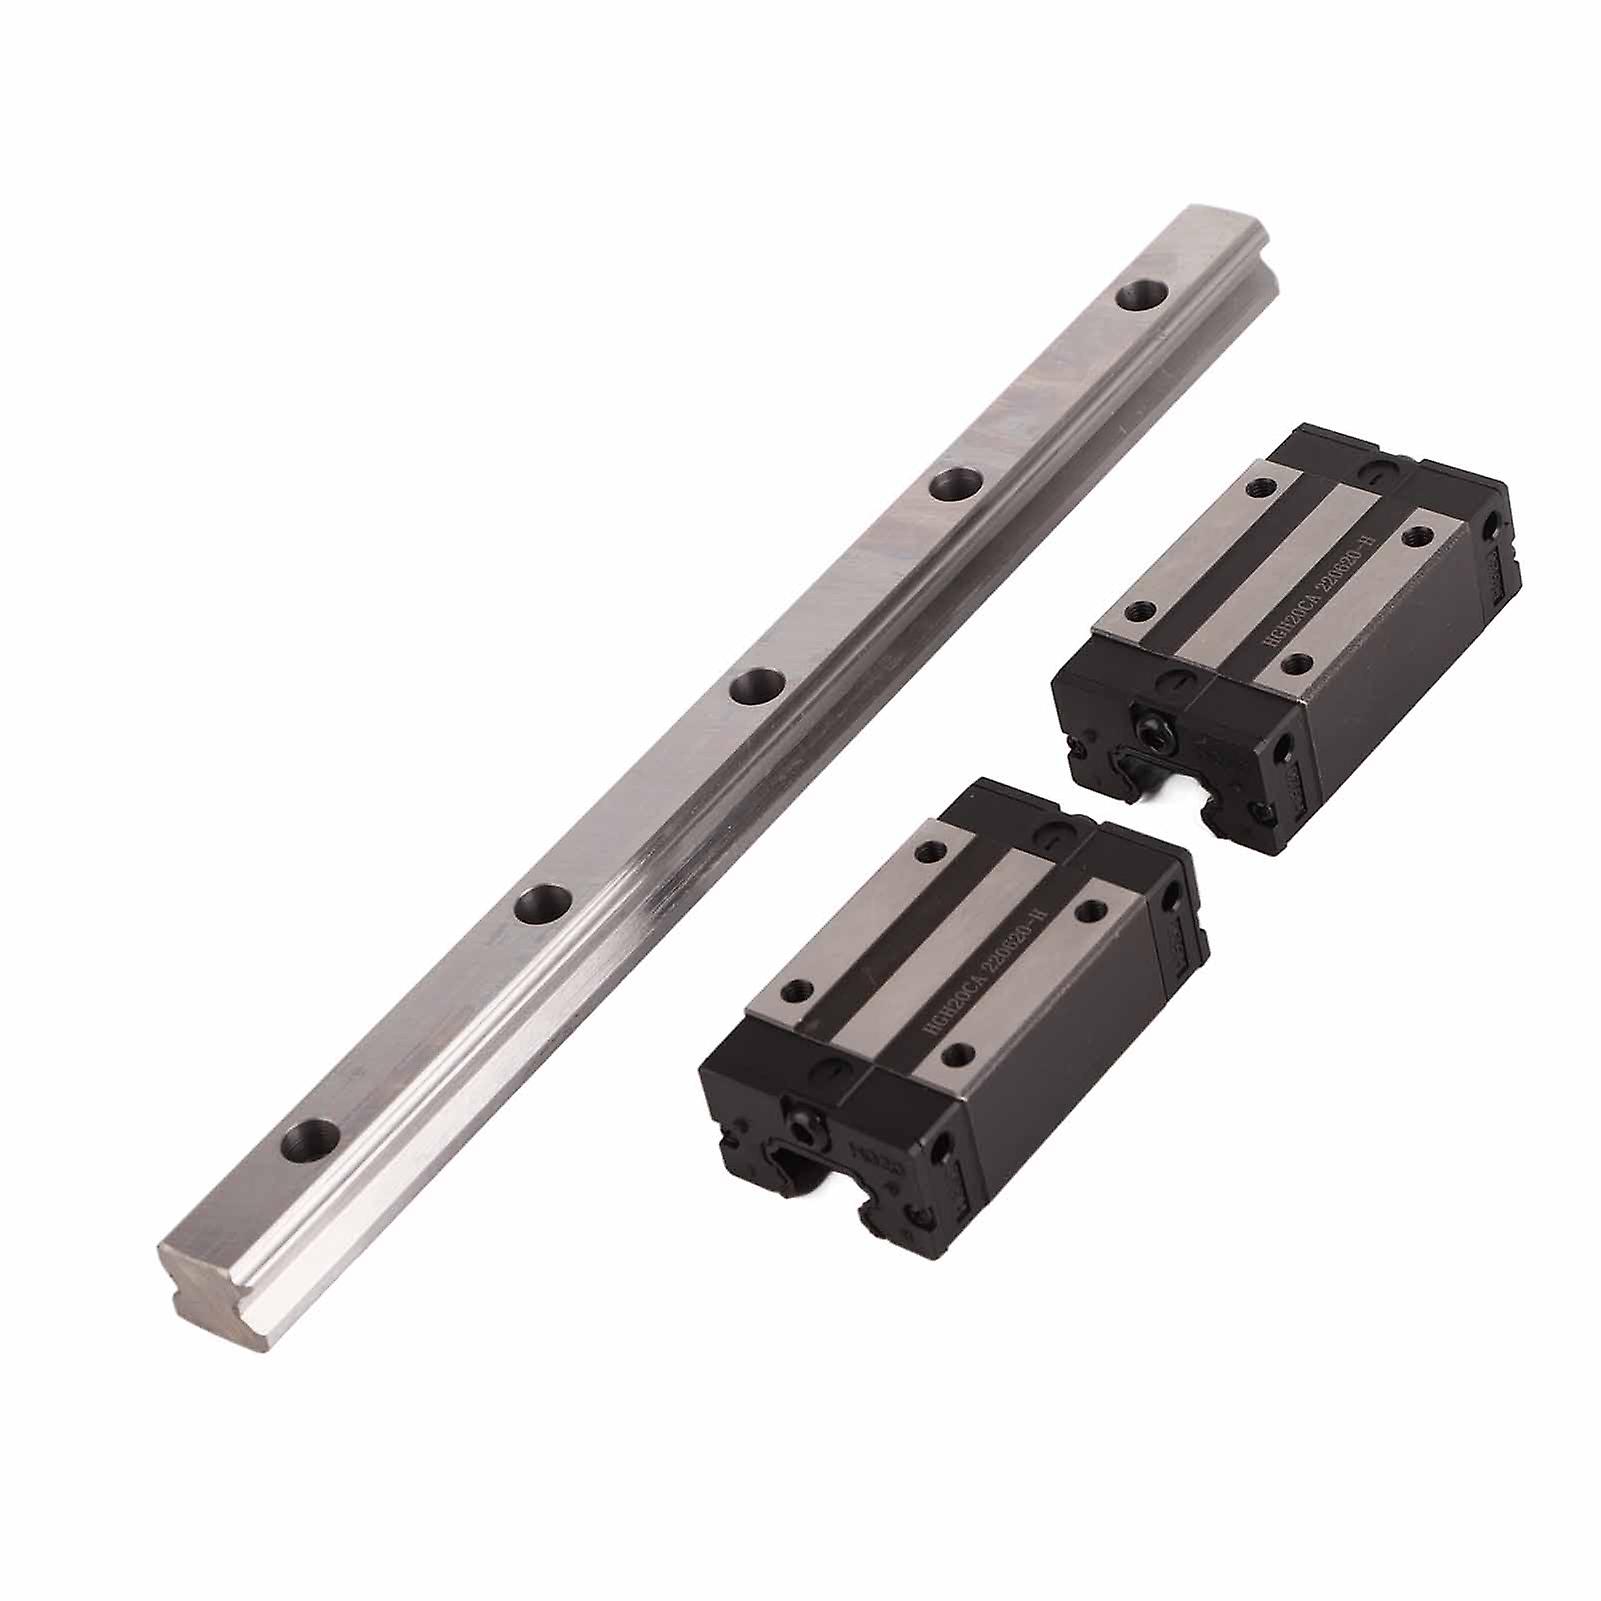 1pc Hgr20300mm Linear Guide Rail + 2pcs Carriages Bearing Block Slider